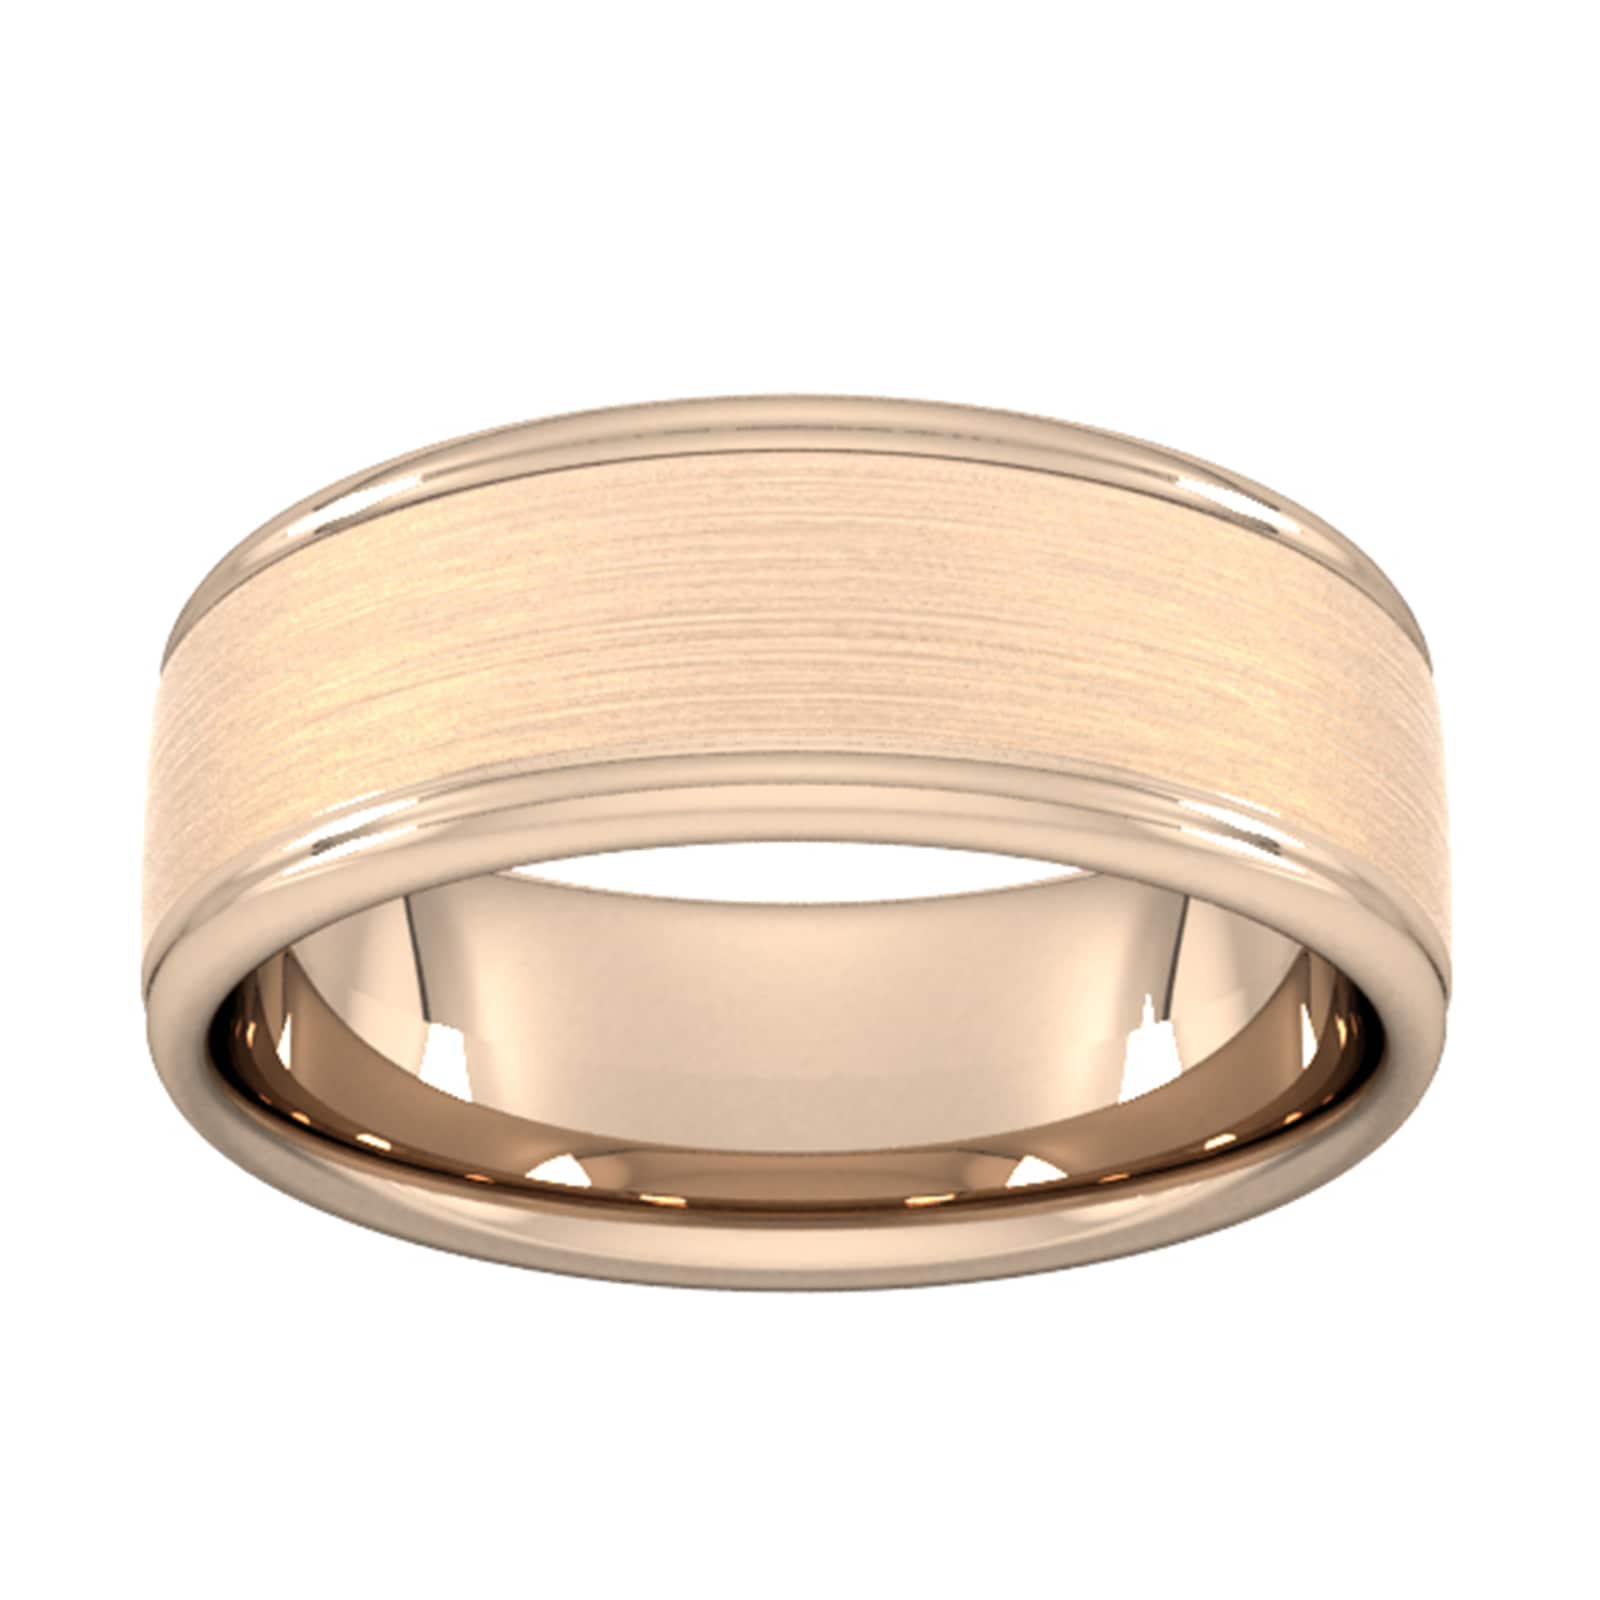 8mm Slight Court Heavy Matt Centre With Grooves Wedding Ring In 9 Carat Rose Gold - Ring Size H